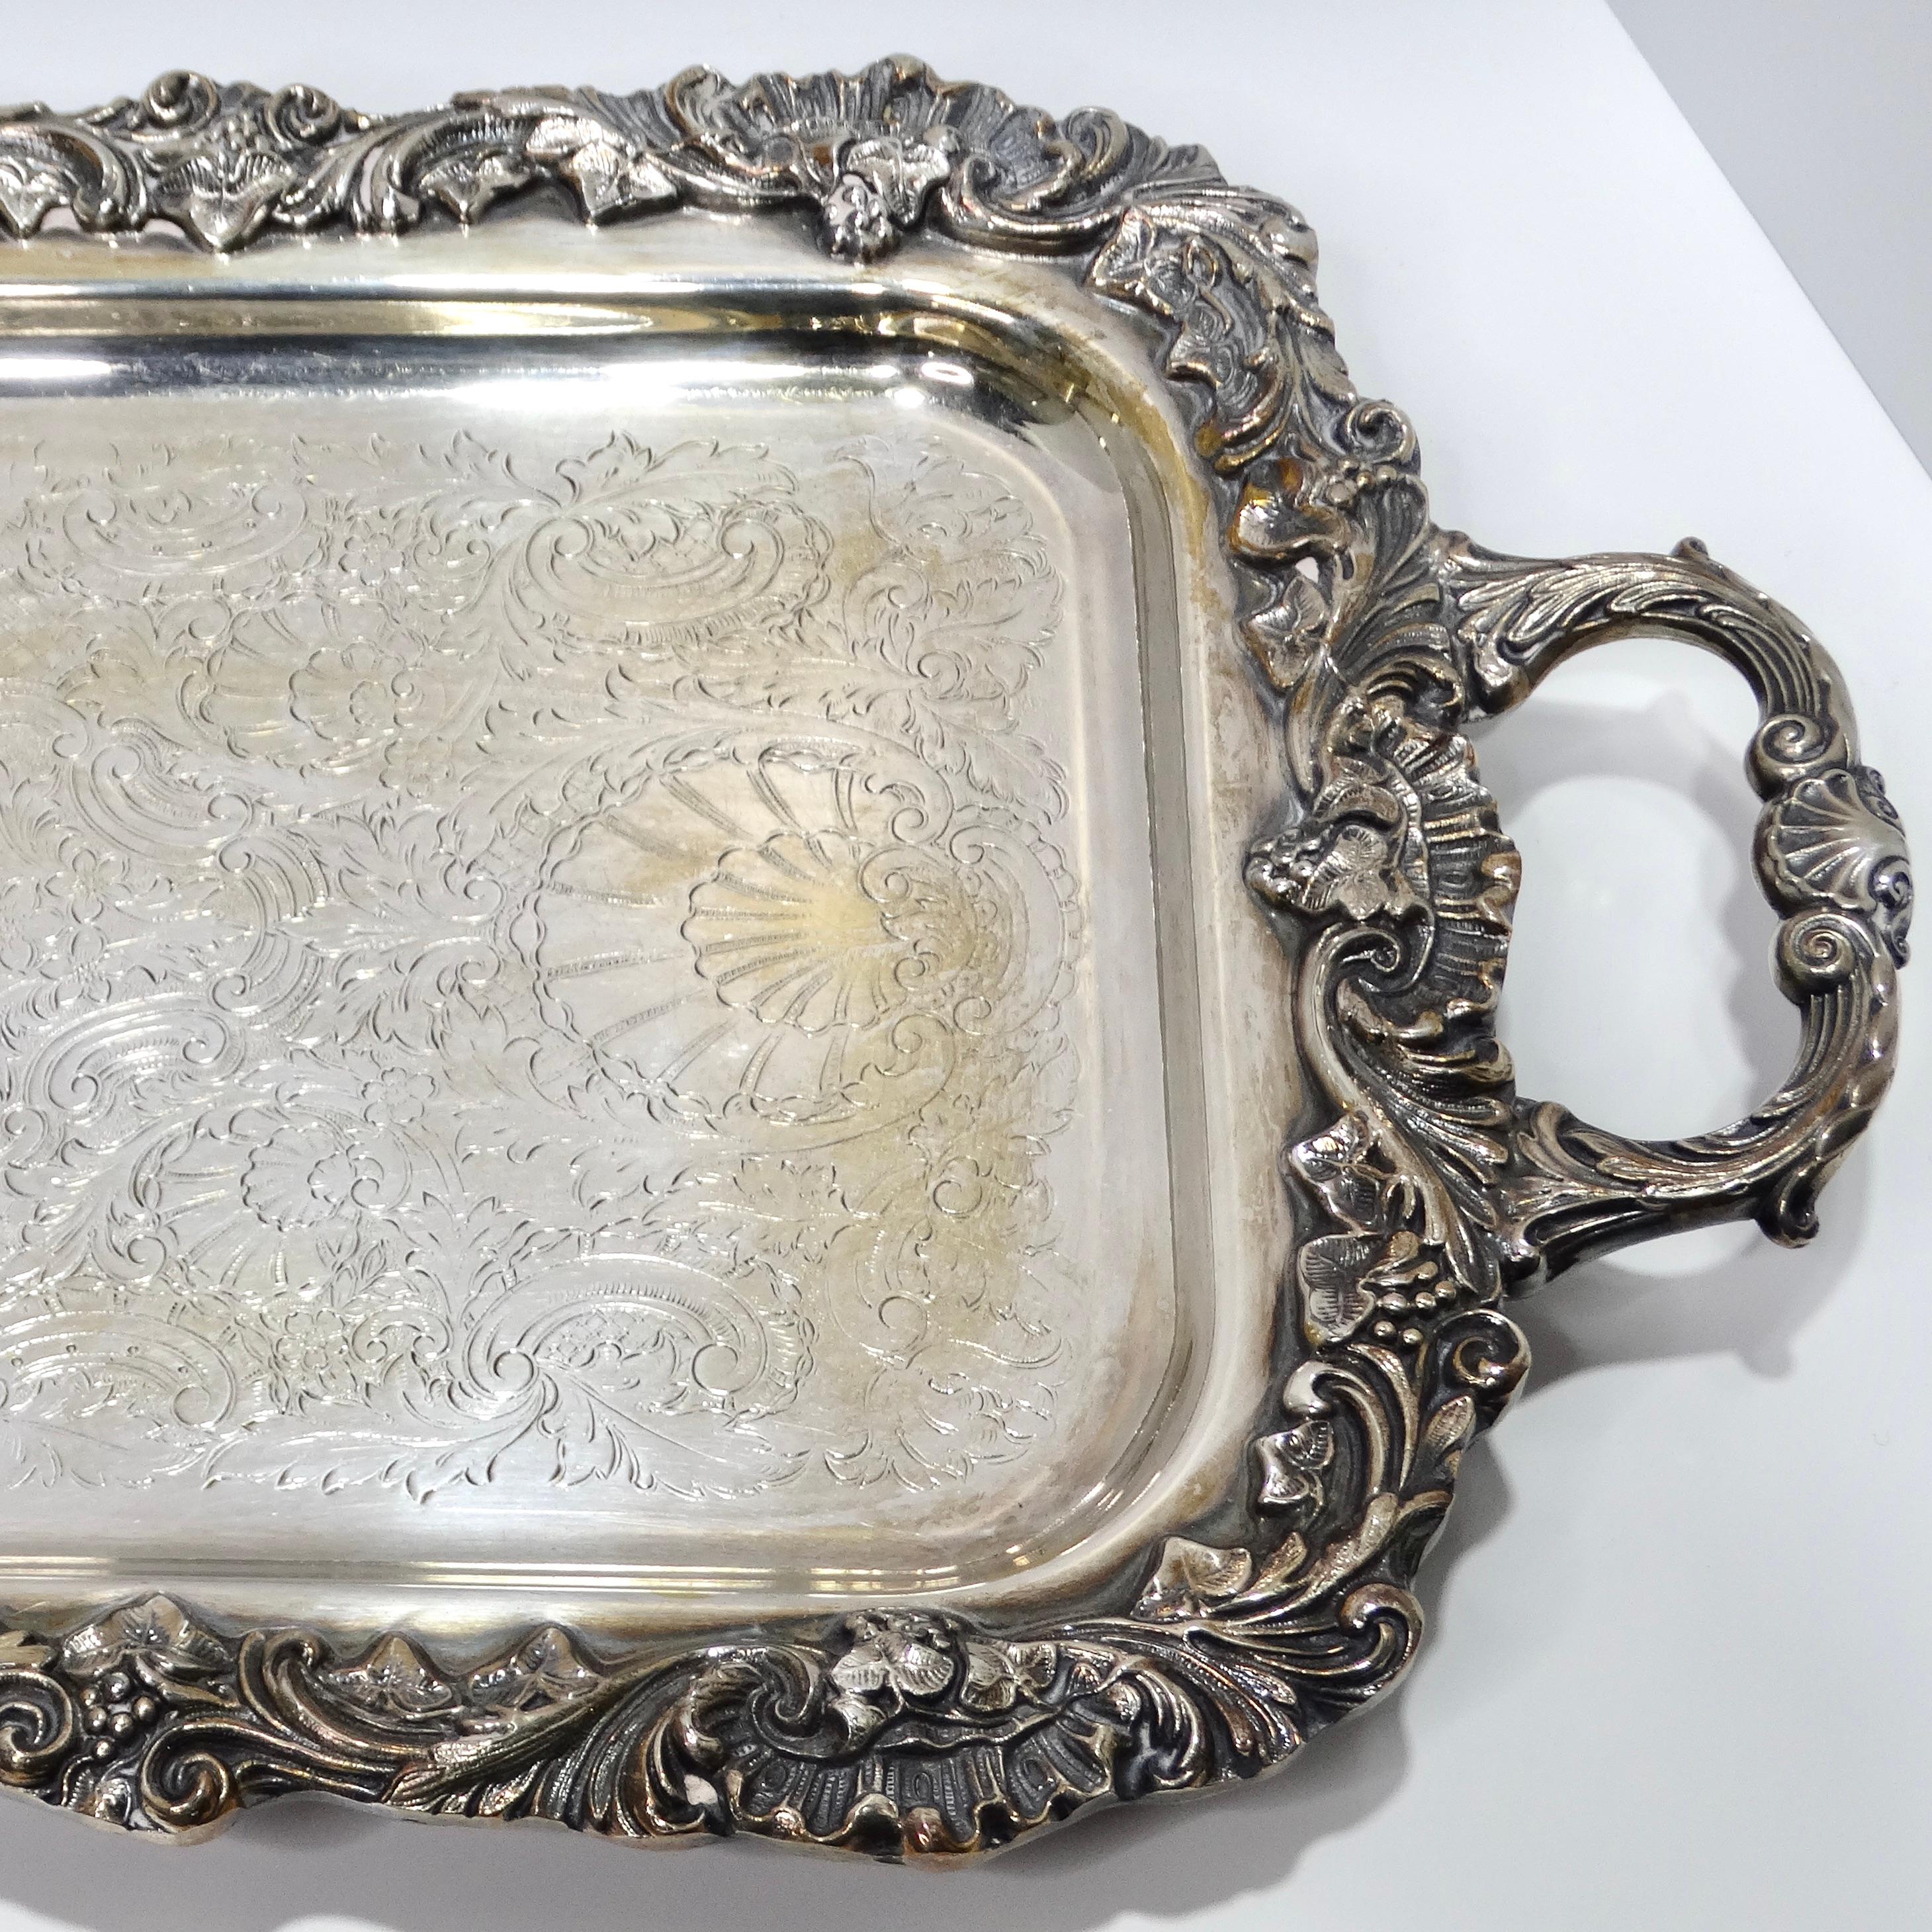 Introducing the Antique Silver Plate Cocktail Tray, a magnificent piece that adds a touch of sophistication to your entertaining endeavors.

Crafted with intricate detail, this large silver-plated cocktail serving tray, also known as a butler tray,